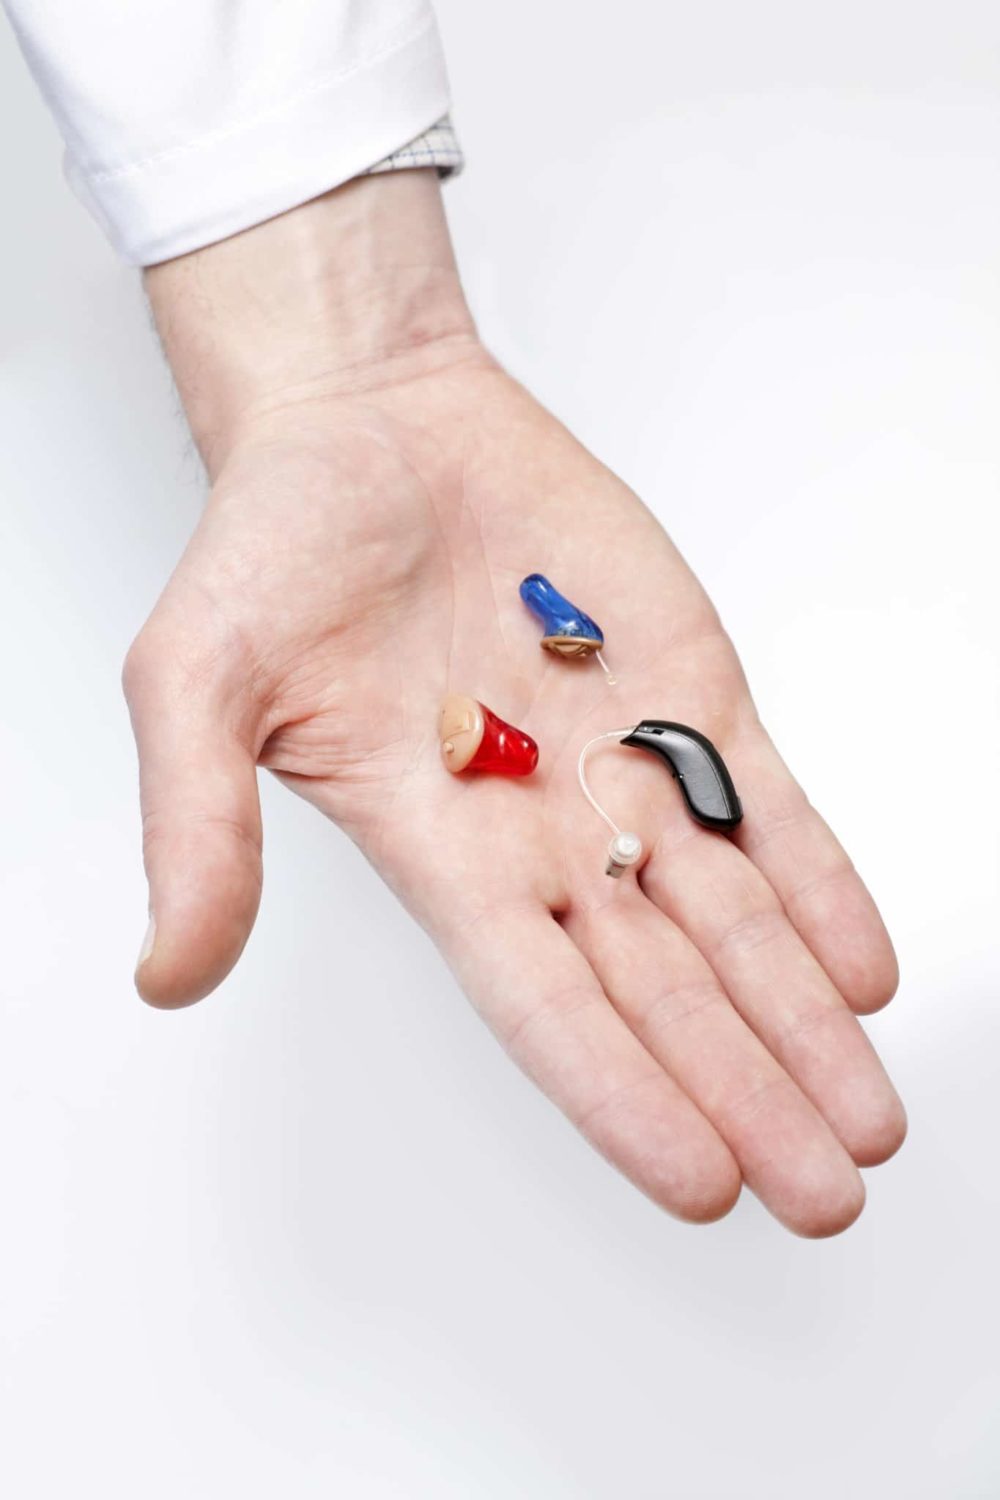 Hand holding variety of hearing aids in Cincinatti, Ohio office.